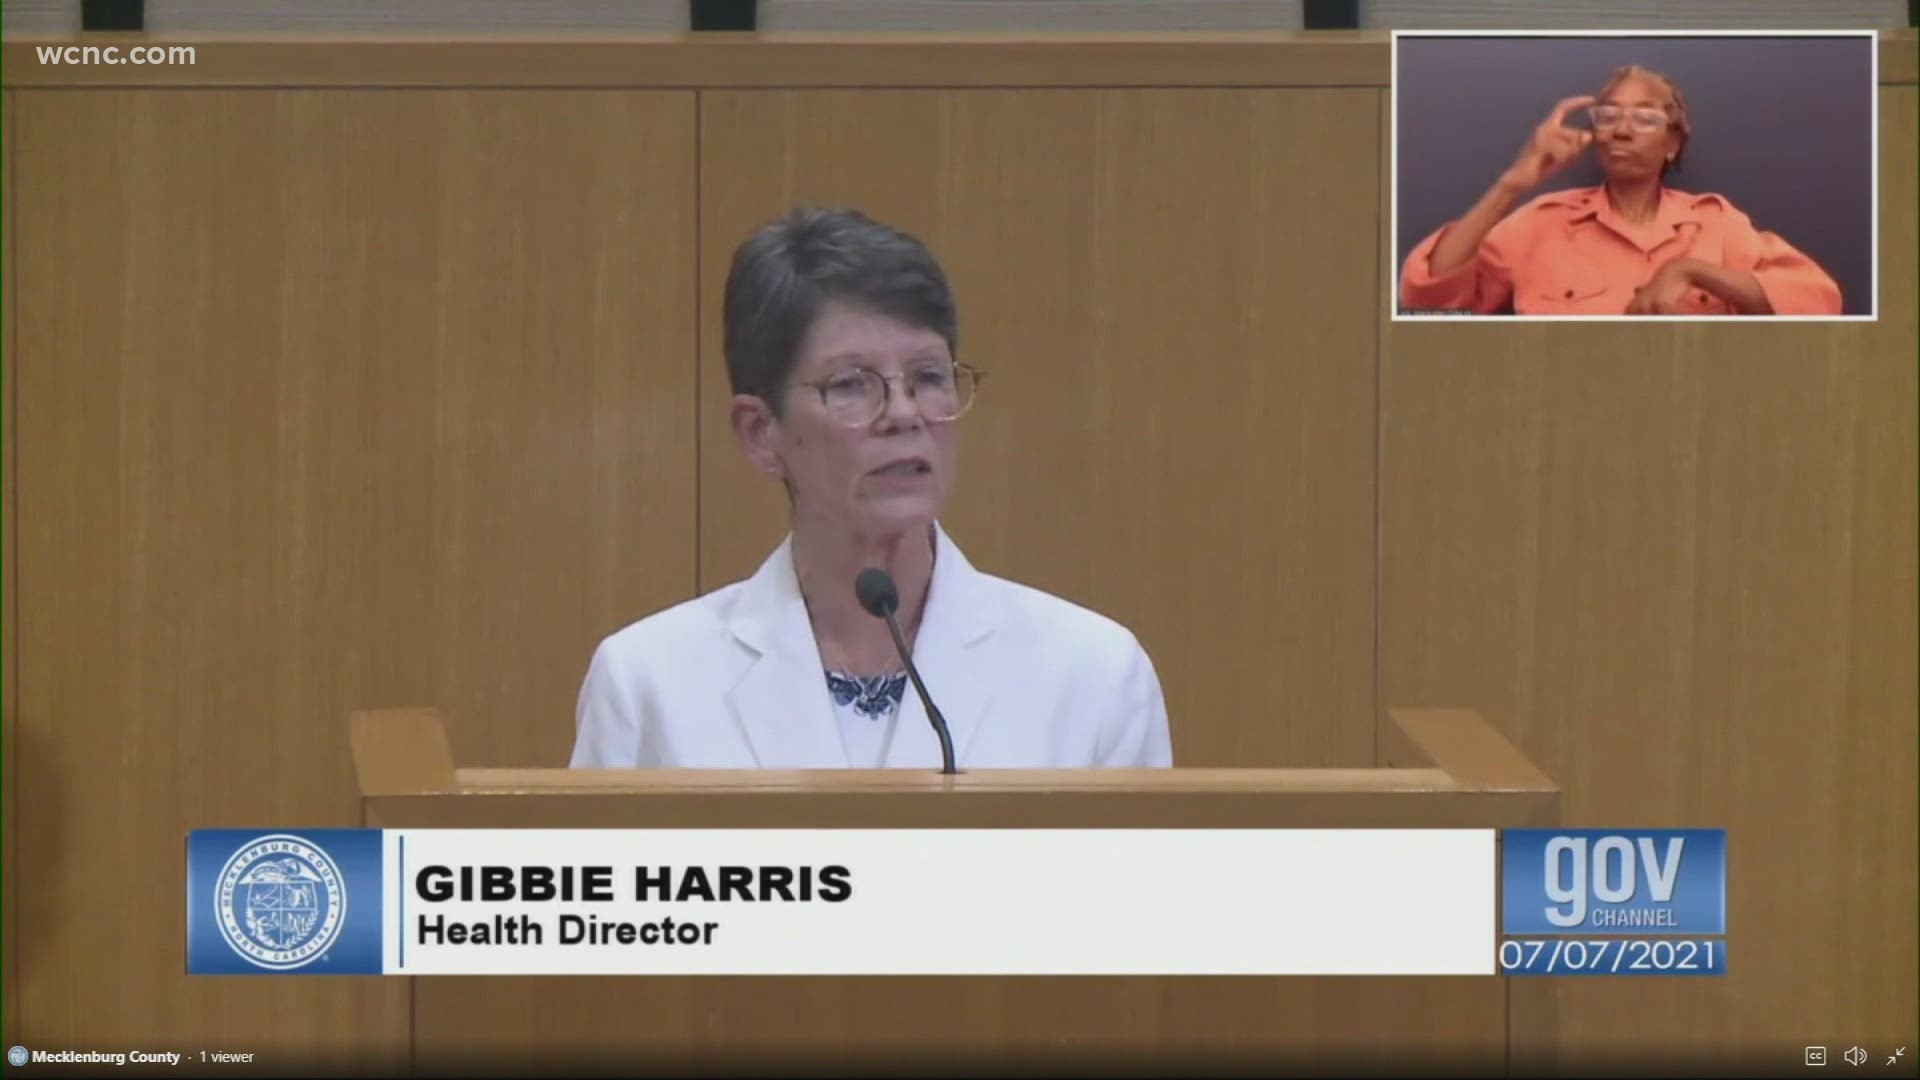 Gibbie Harris who serves as the Public Health Director for the county made the announcement Wednesday, July 7